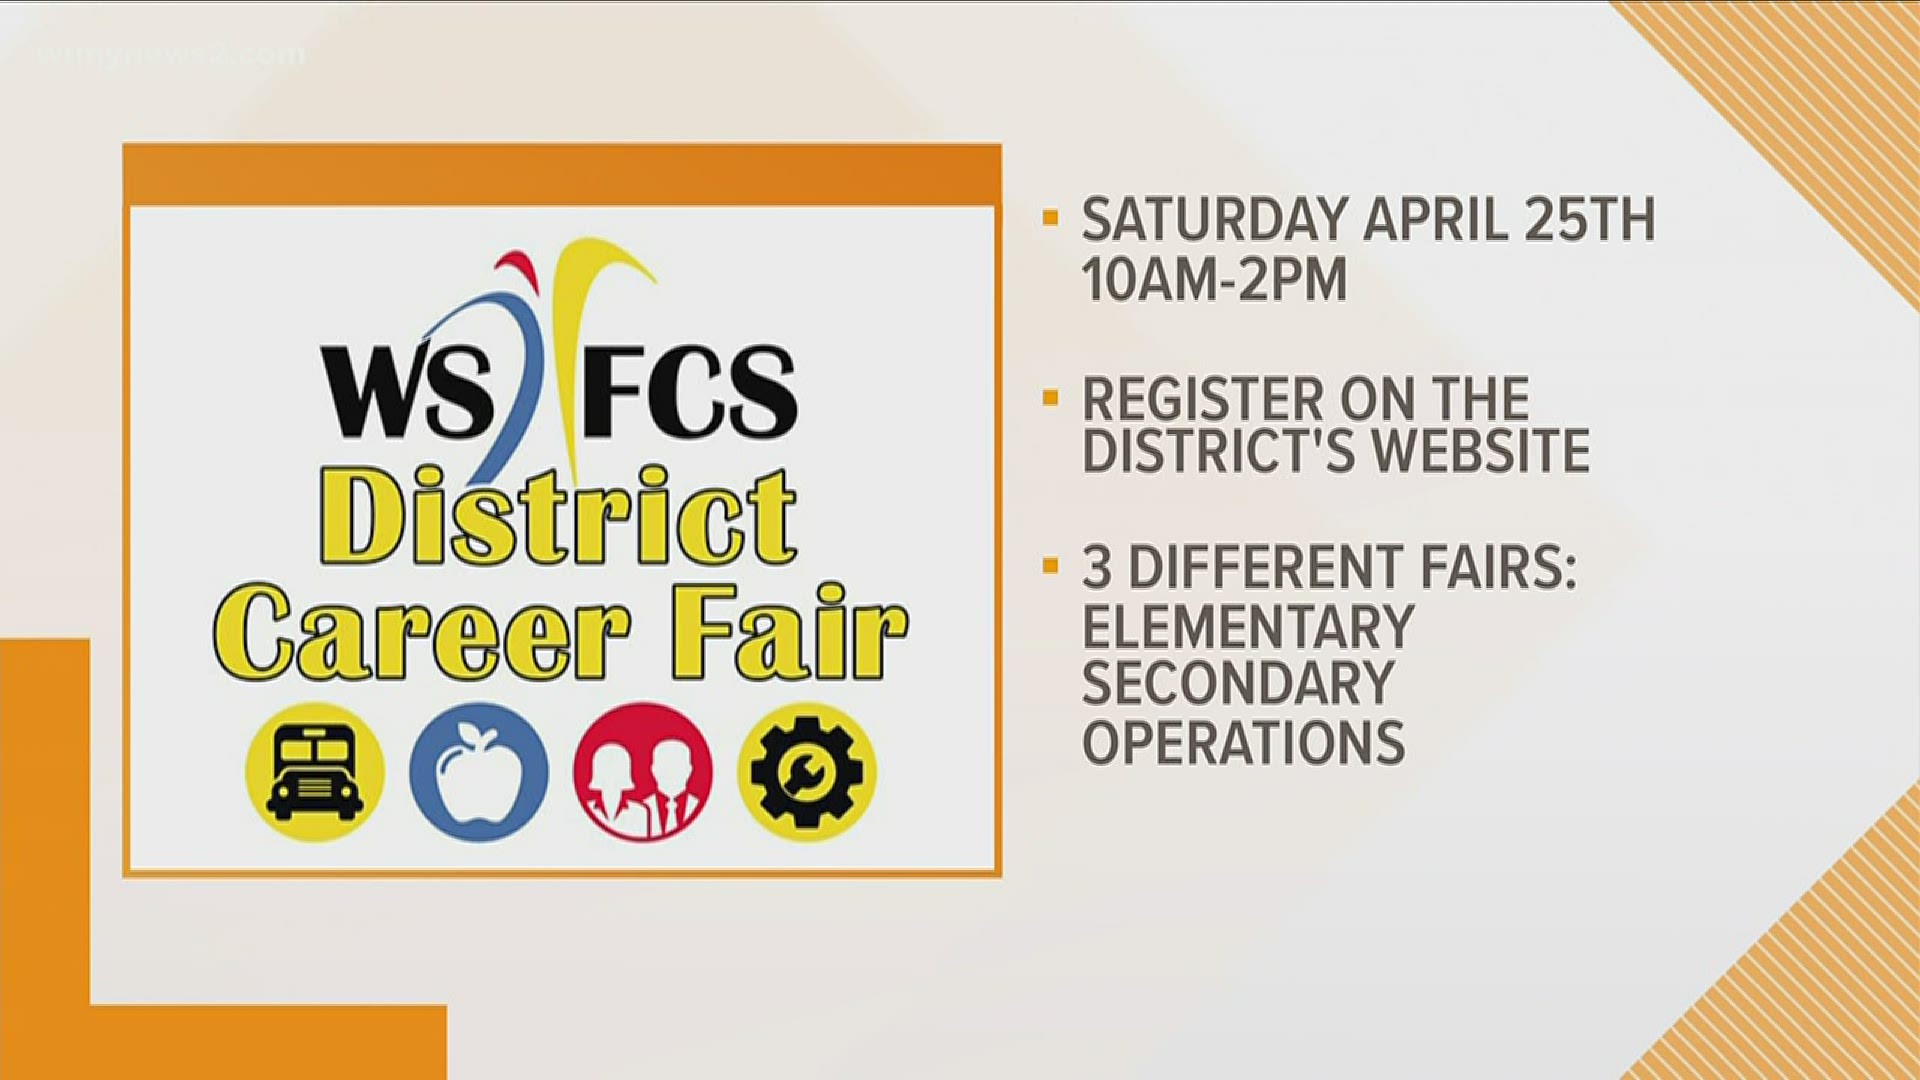 WSFCS is holding a virtual job fair Saturday, April 25th as it looks to fill hundreds of open positions ahead of the next school year.